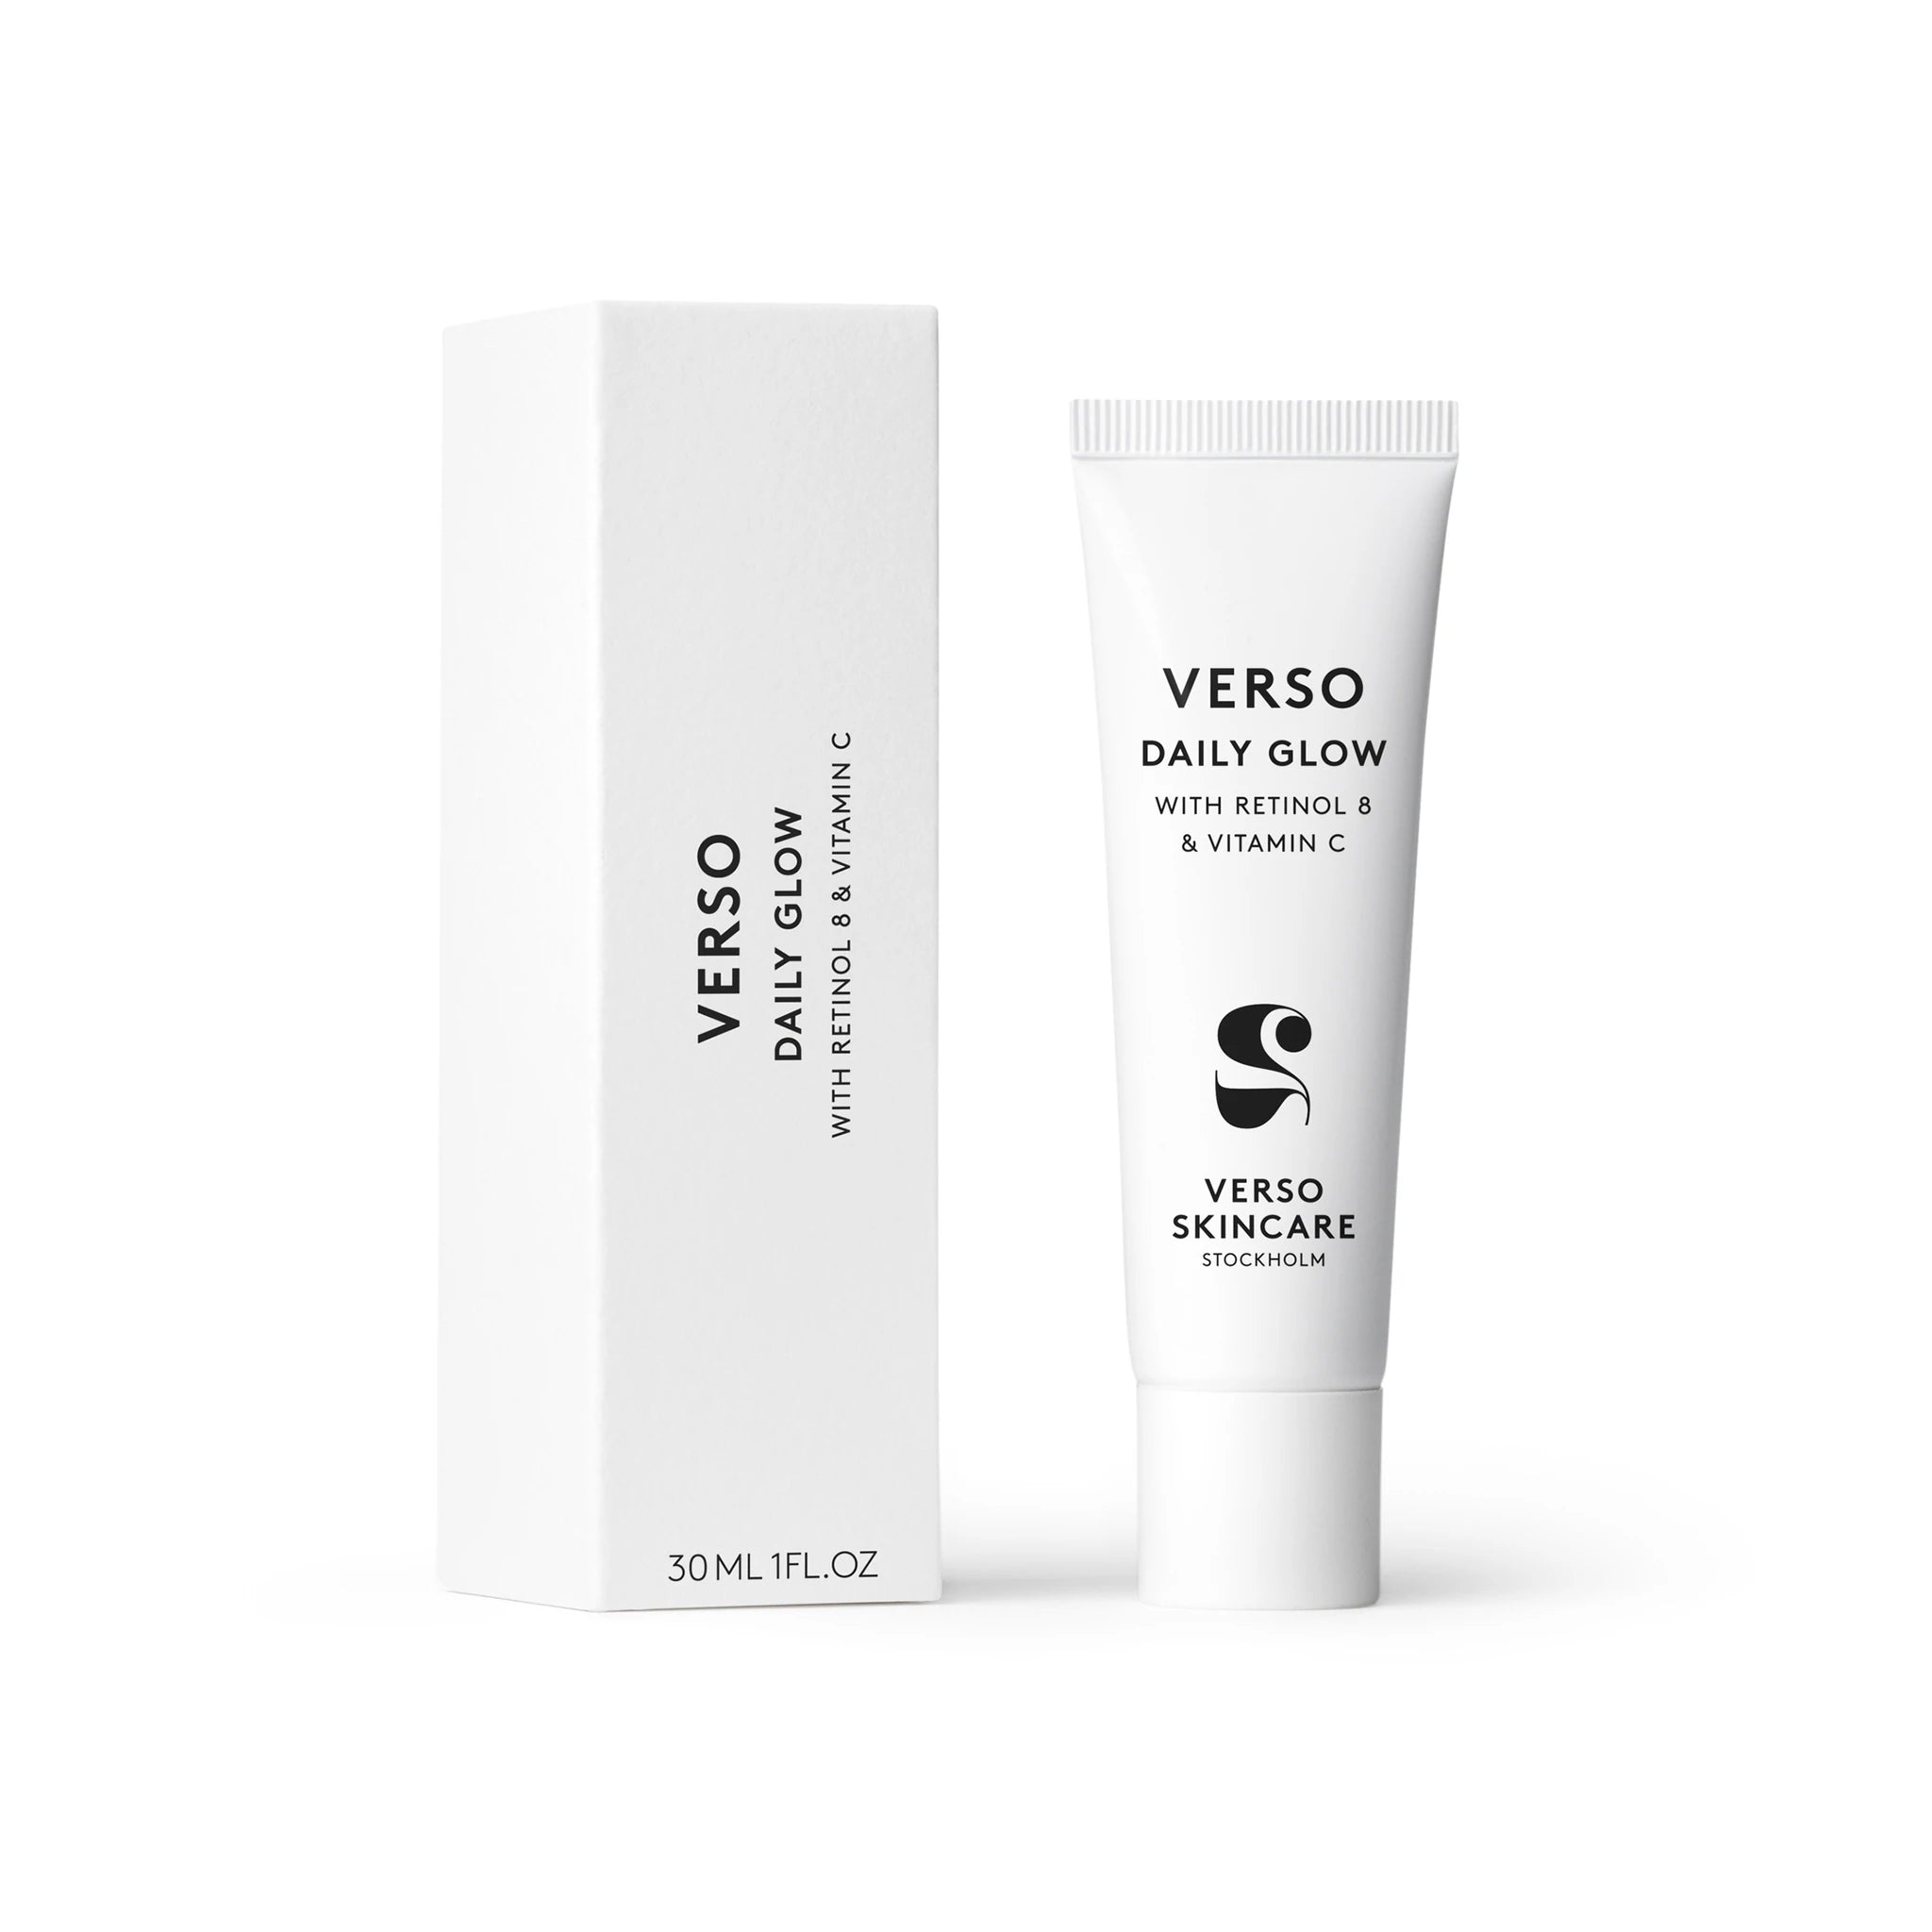 VERSO DAILY GLOW